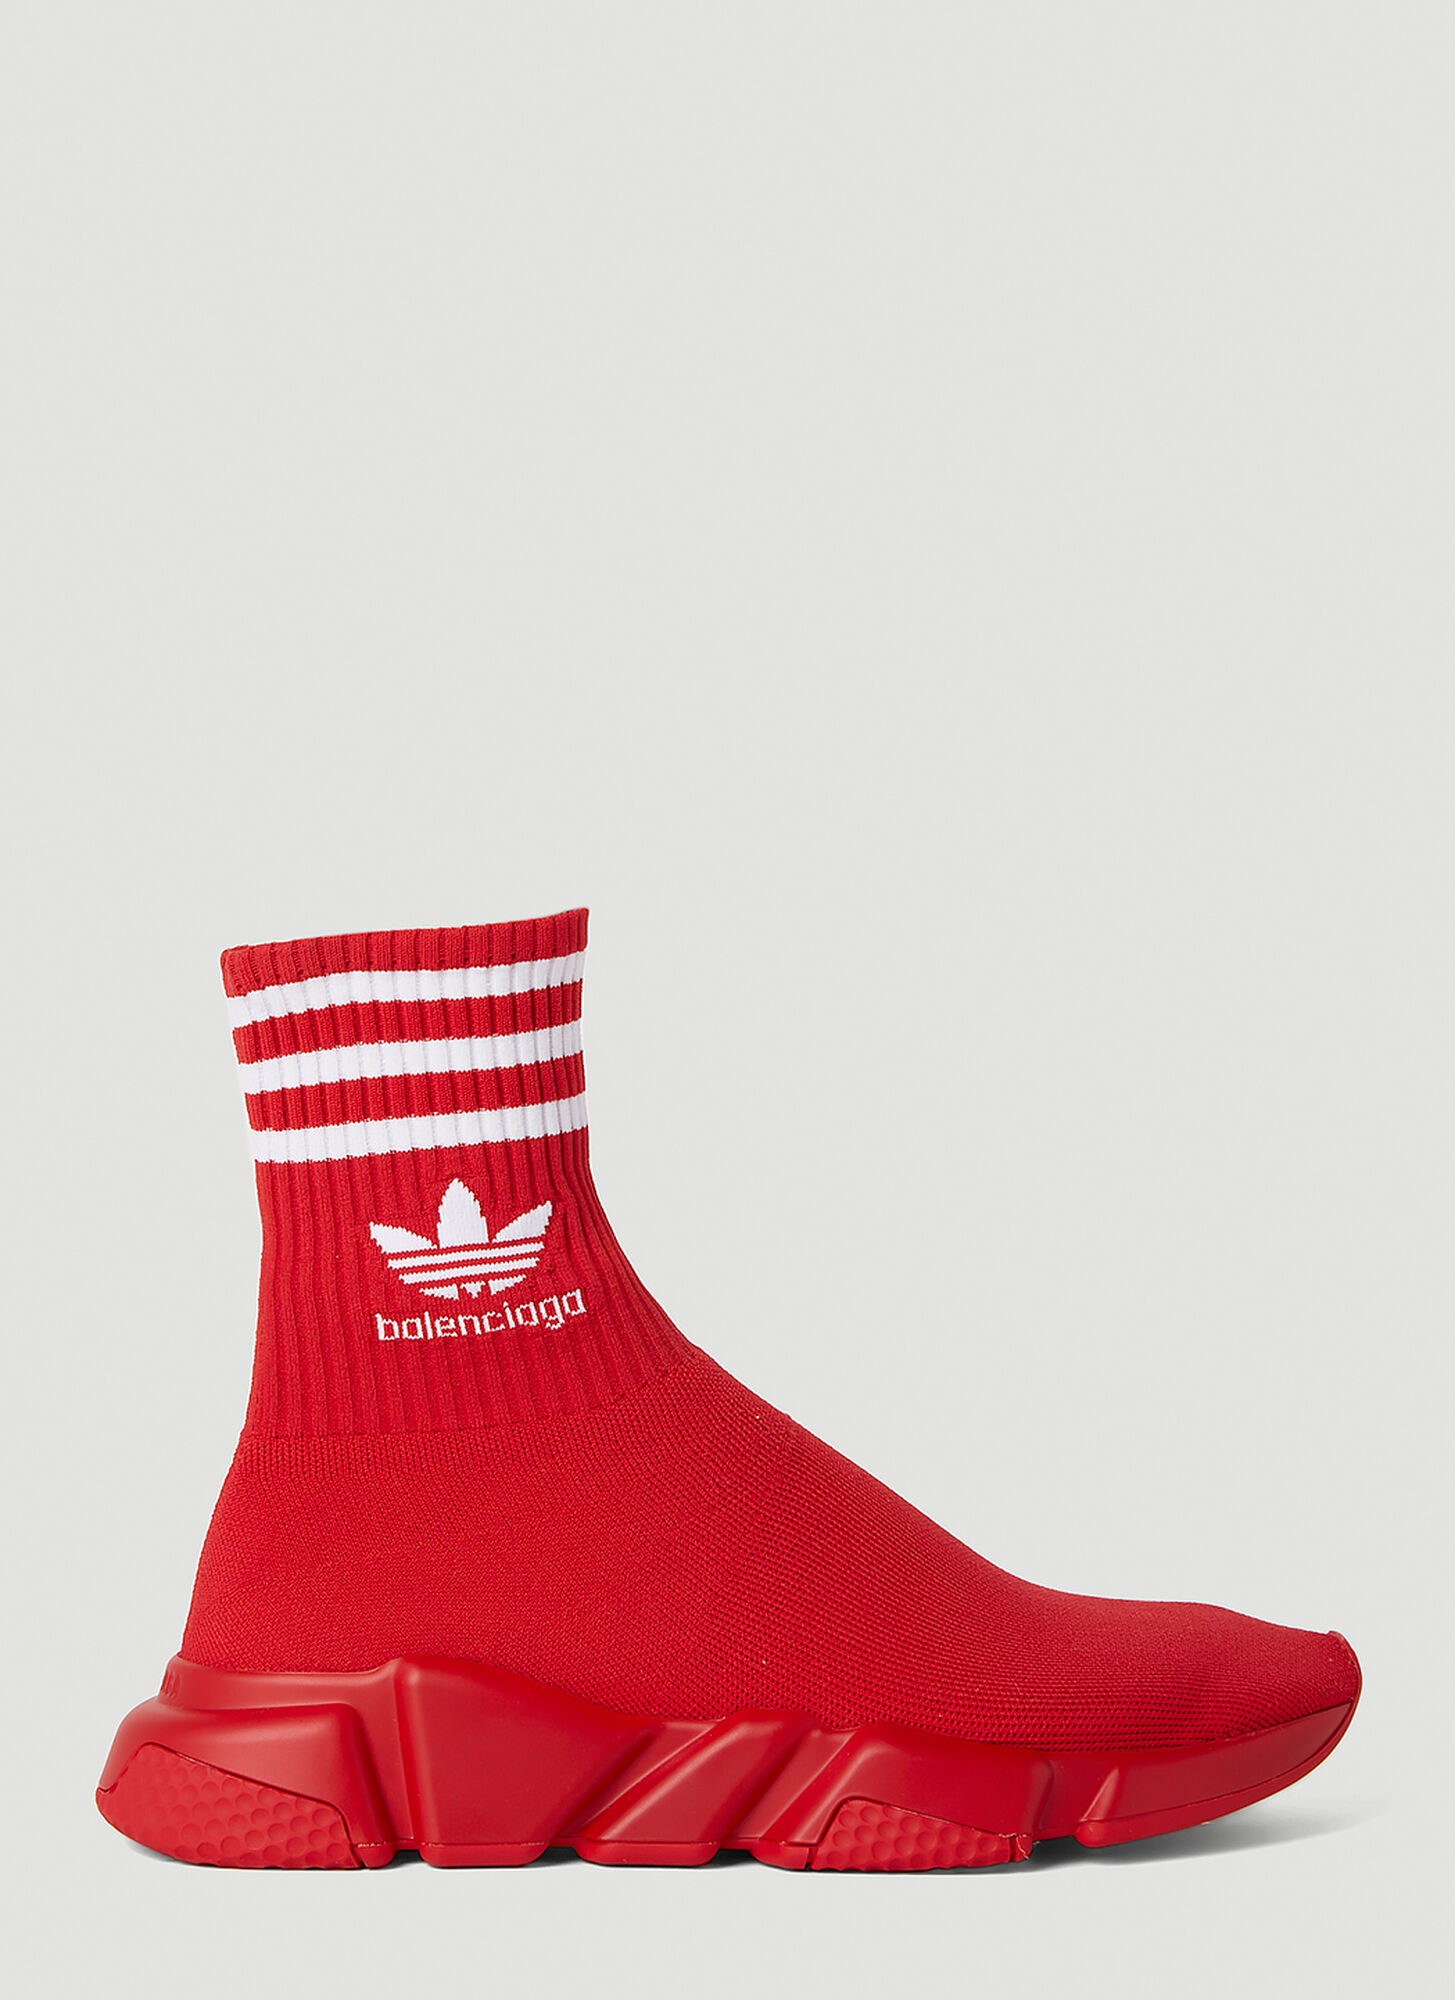 Adidas X Balenciaga Speed Trainers In Red